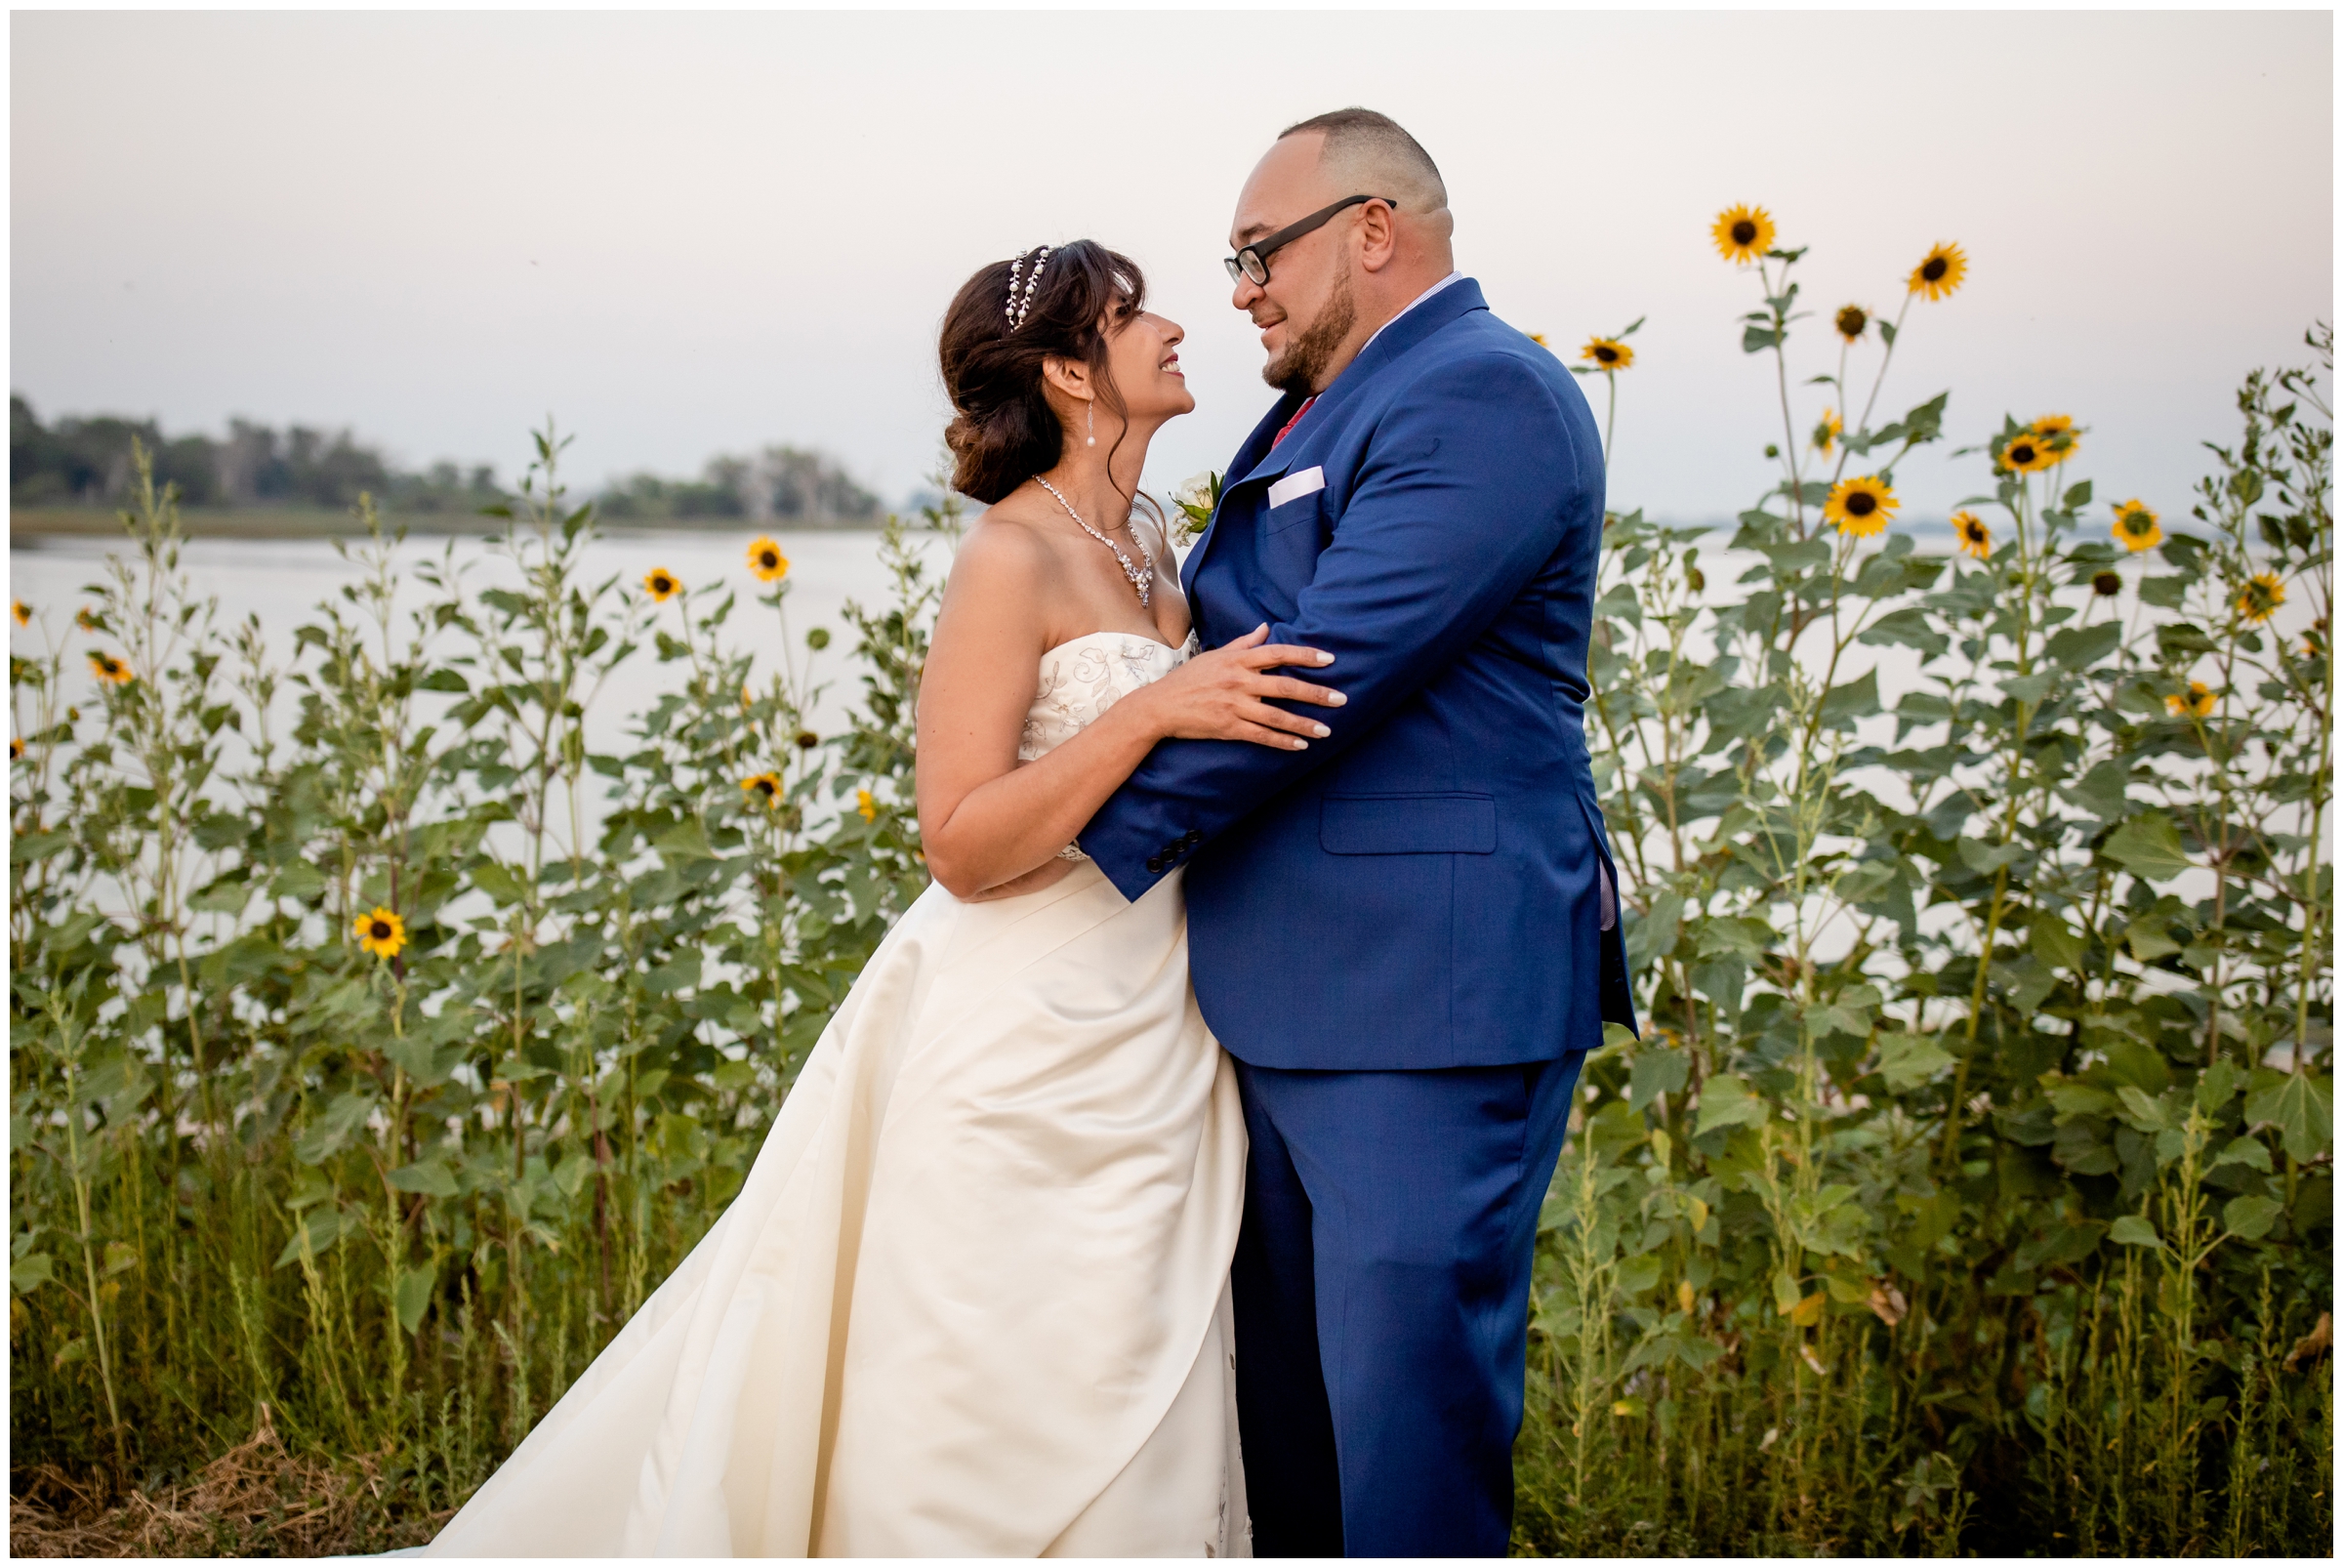 couple posing next to sunflowers during Colorado sunrise morning elopement photography session at Barr Lake State Park 